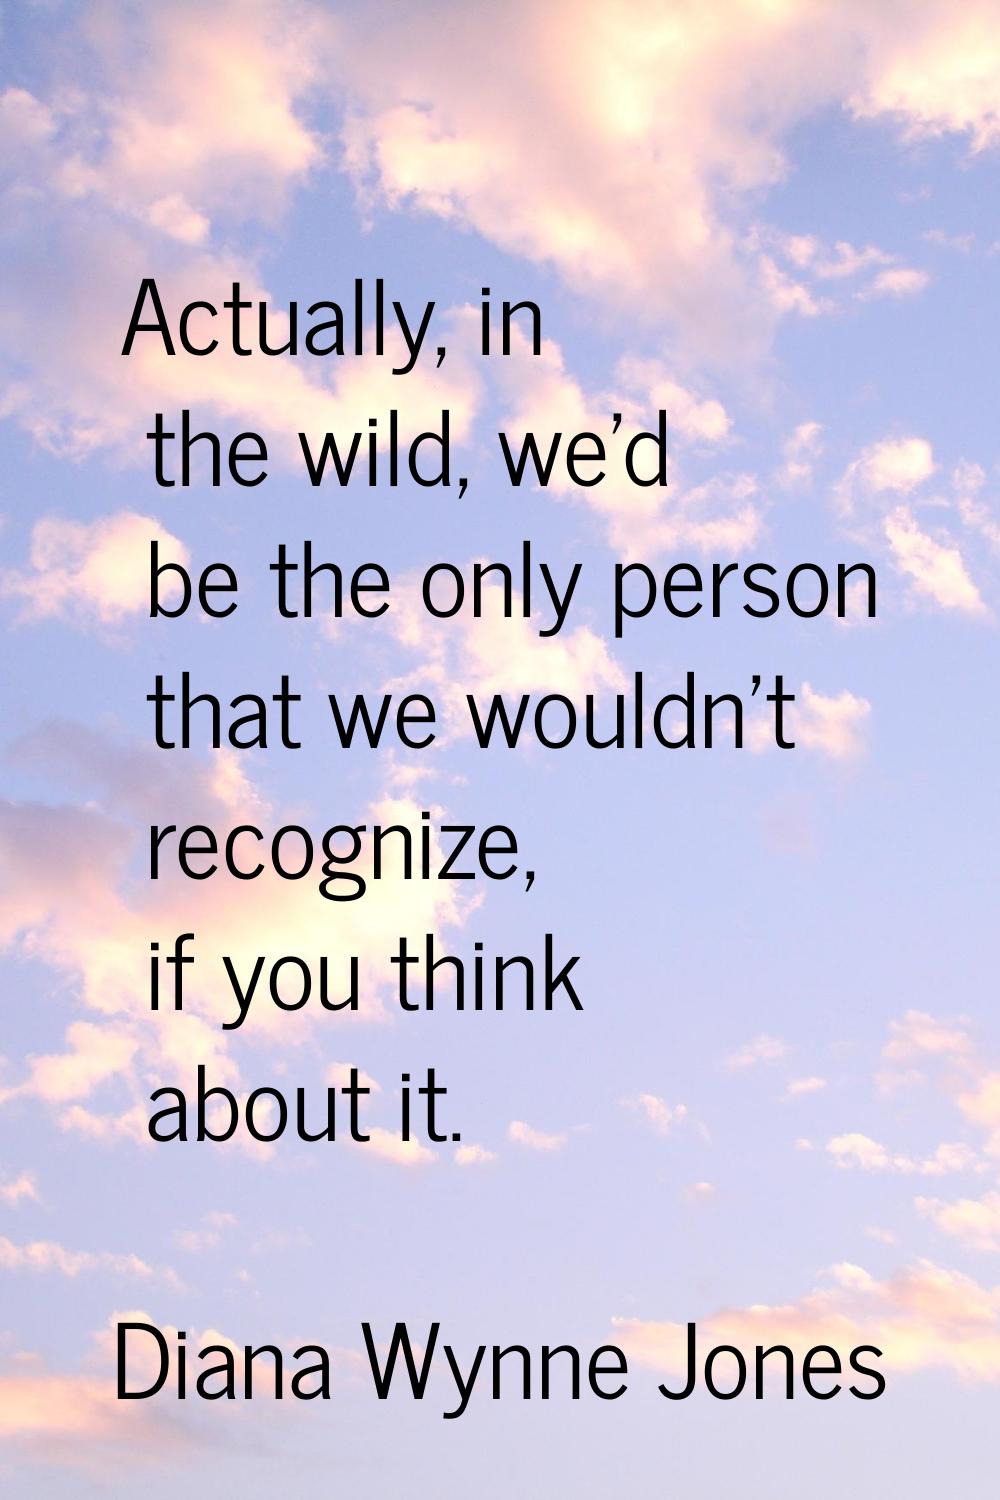 Actually, in the wild, we'd be the only person that we wouldn't recognize, if you think about it.